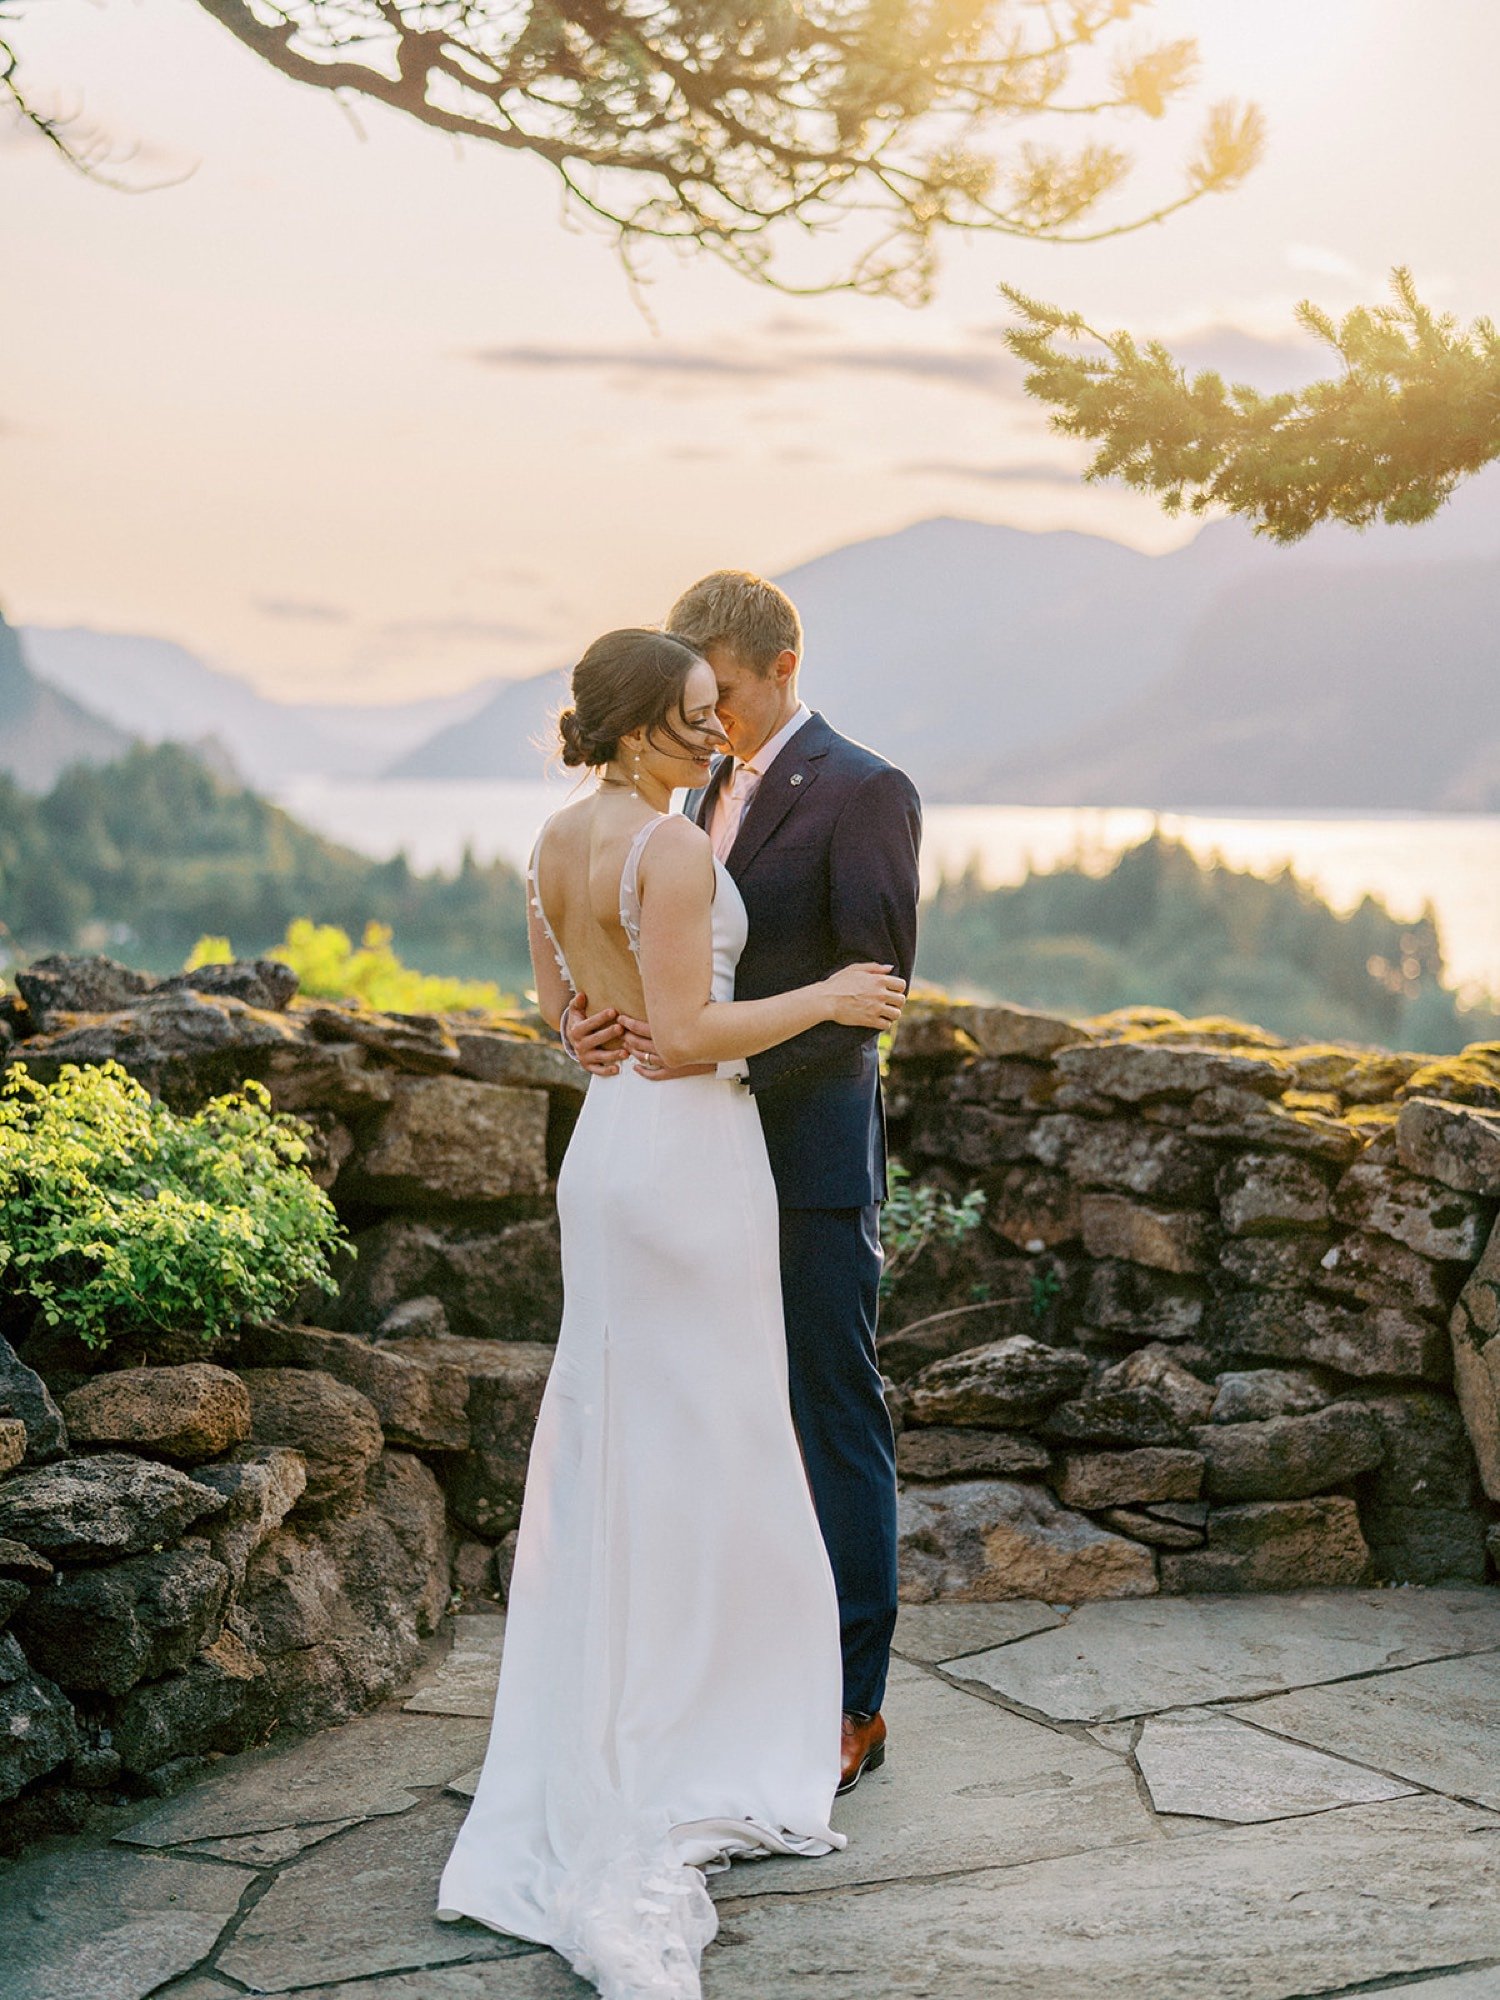 001_sunset wedding portrait overlooking the Hood River at the Griffin House wedding venue in Oregon.jpg